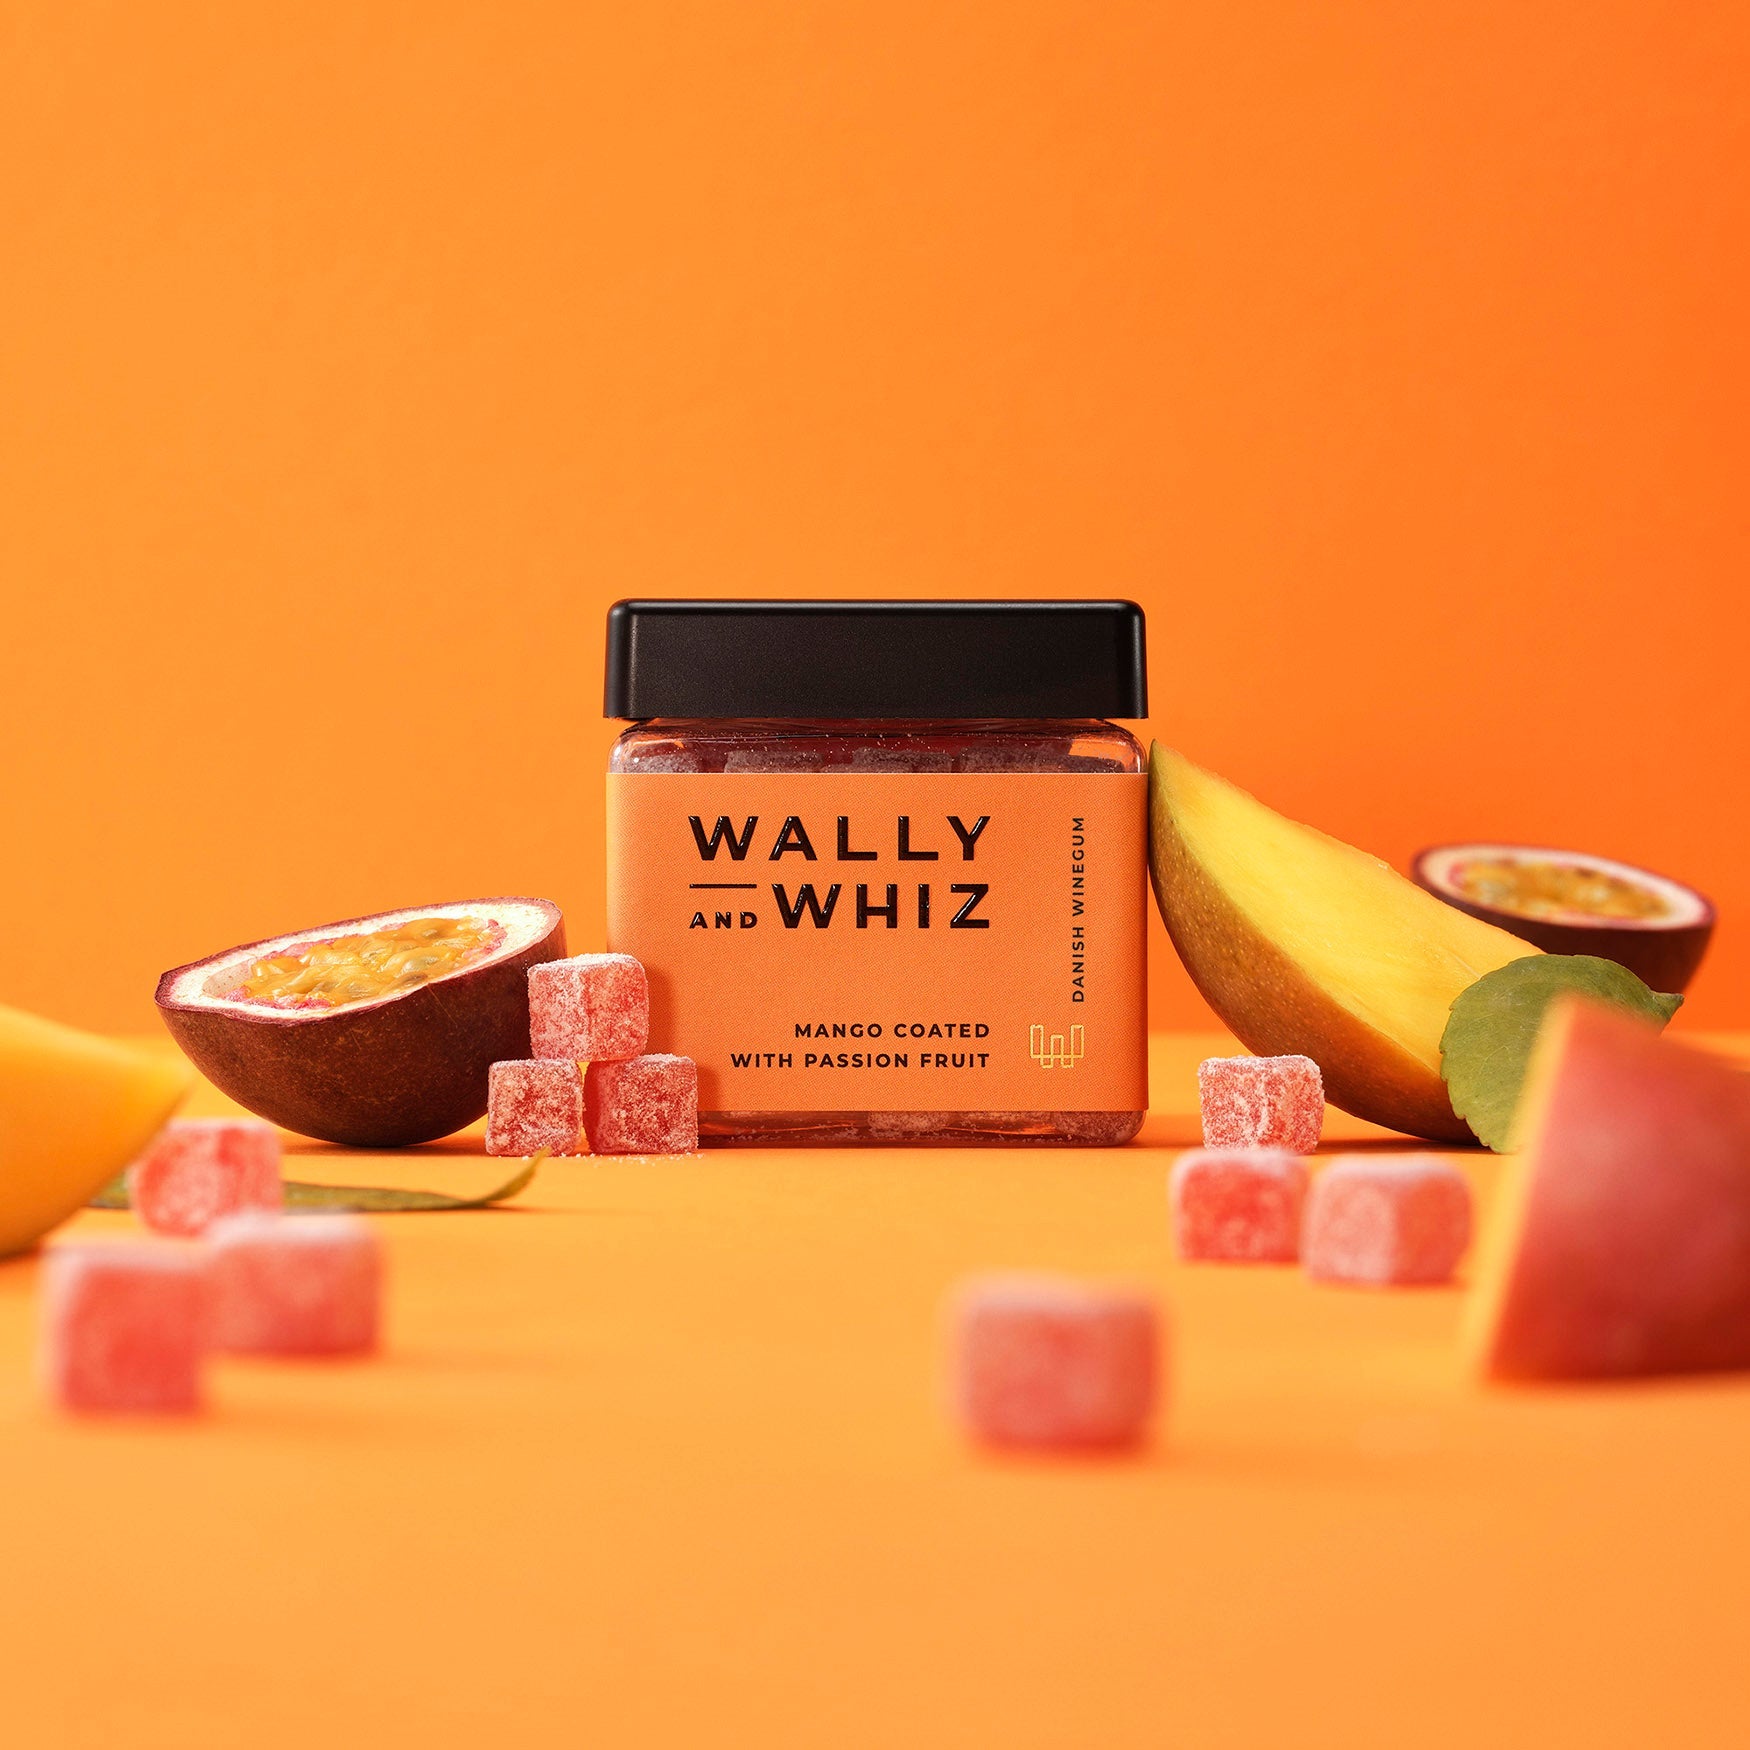 Wally and Whiz Vingummi Cube Mango Med Passionsfrugt, 140g